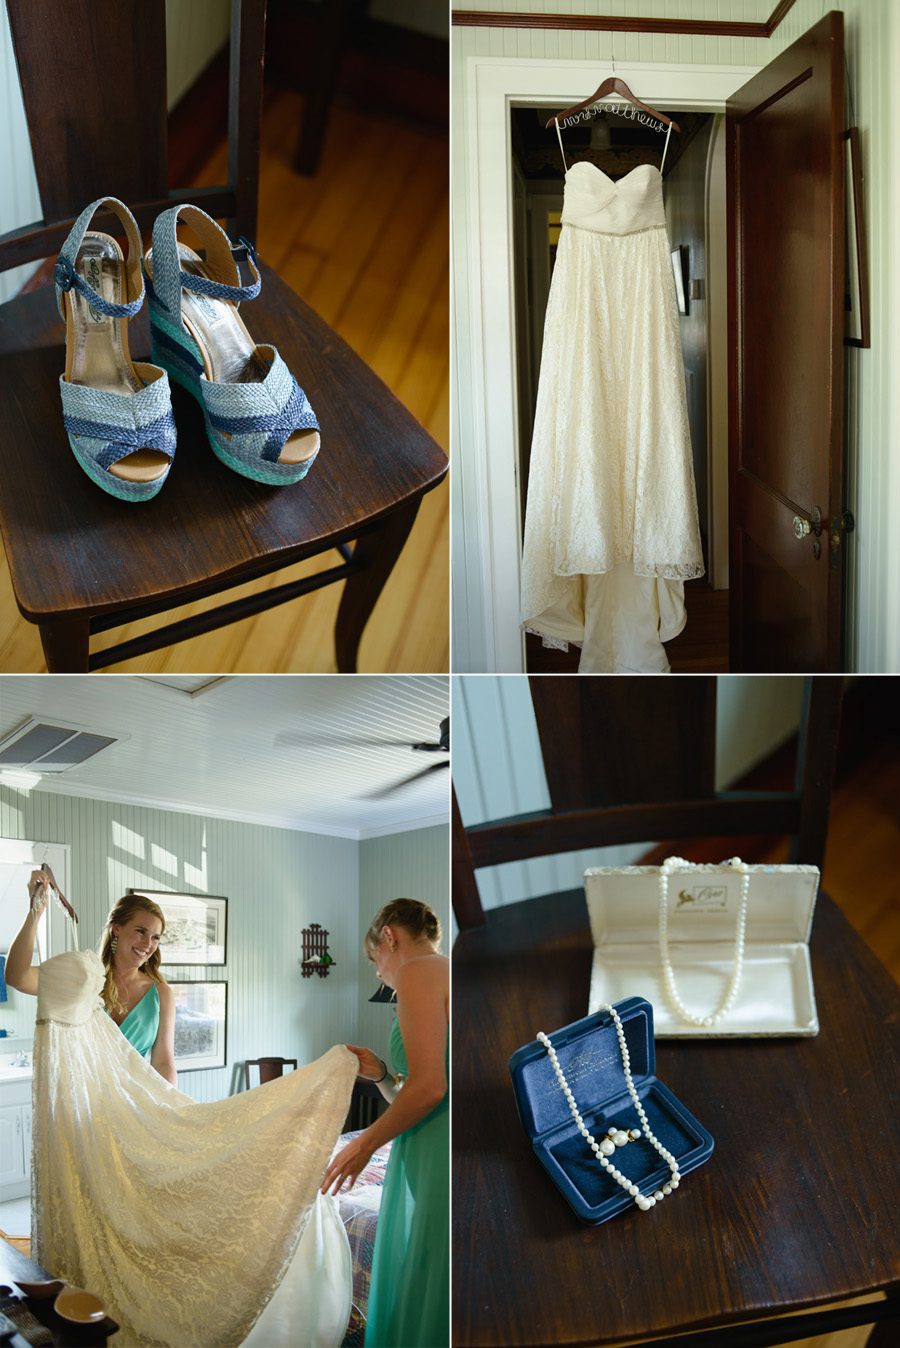 Michele and Zach wedding on Roanoke Island Outer Banks by Neil GT Photography getting ready details